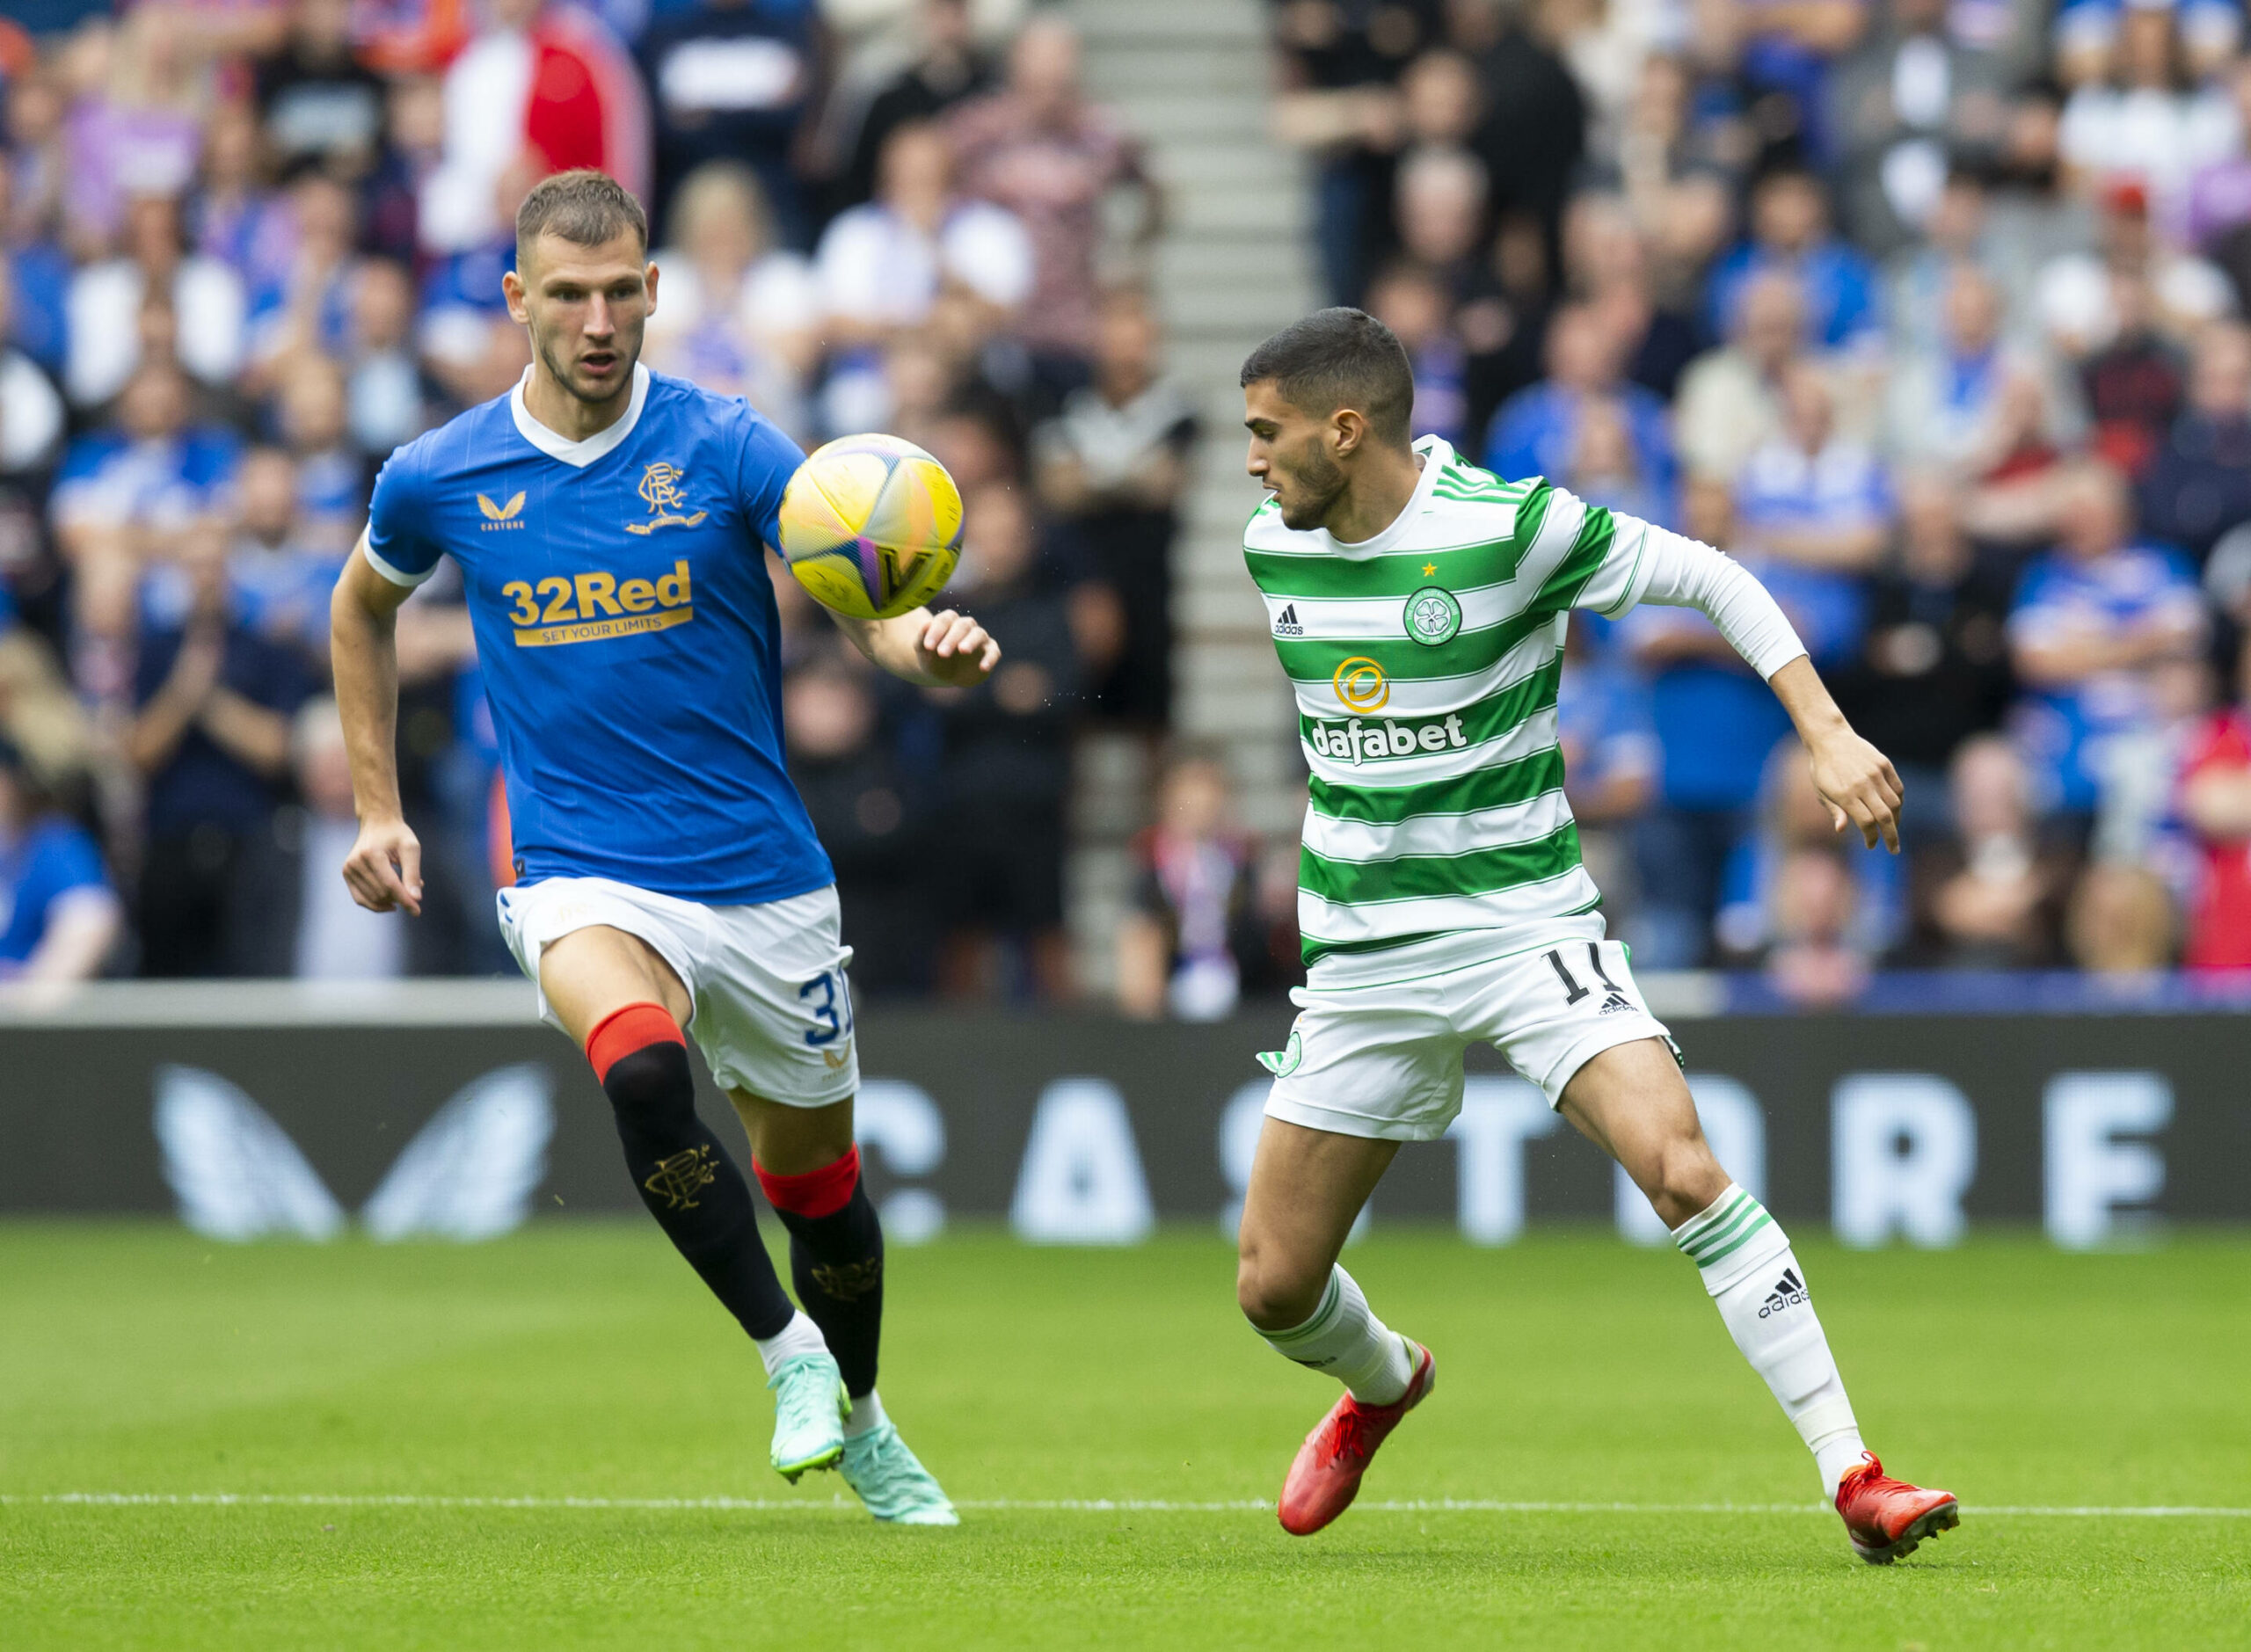 Borna Barisic to leave Rangers for Roma?